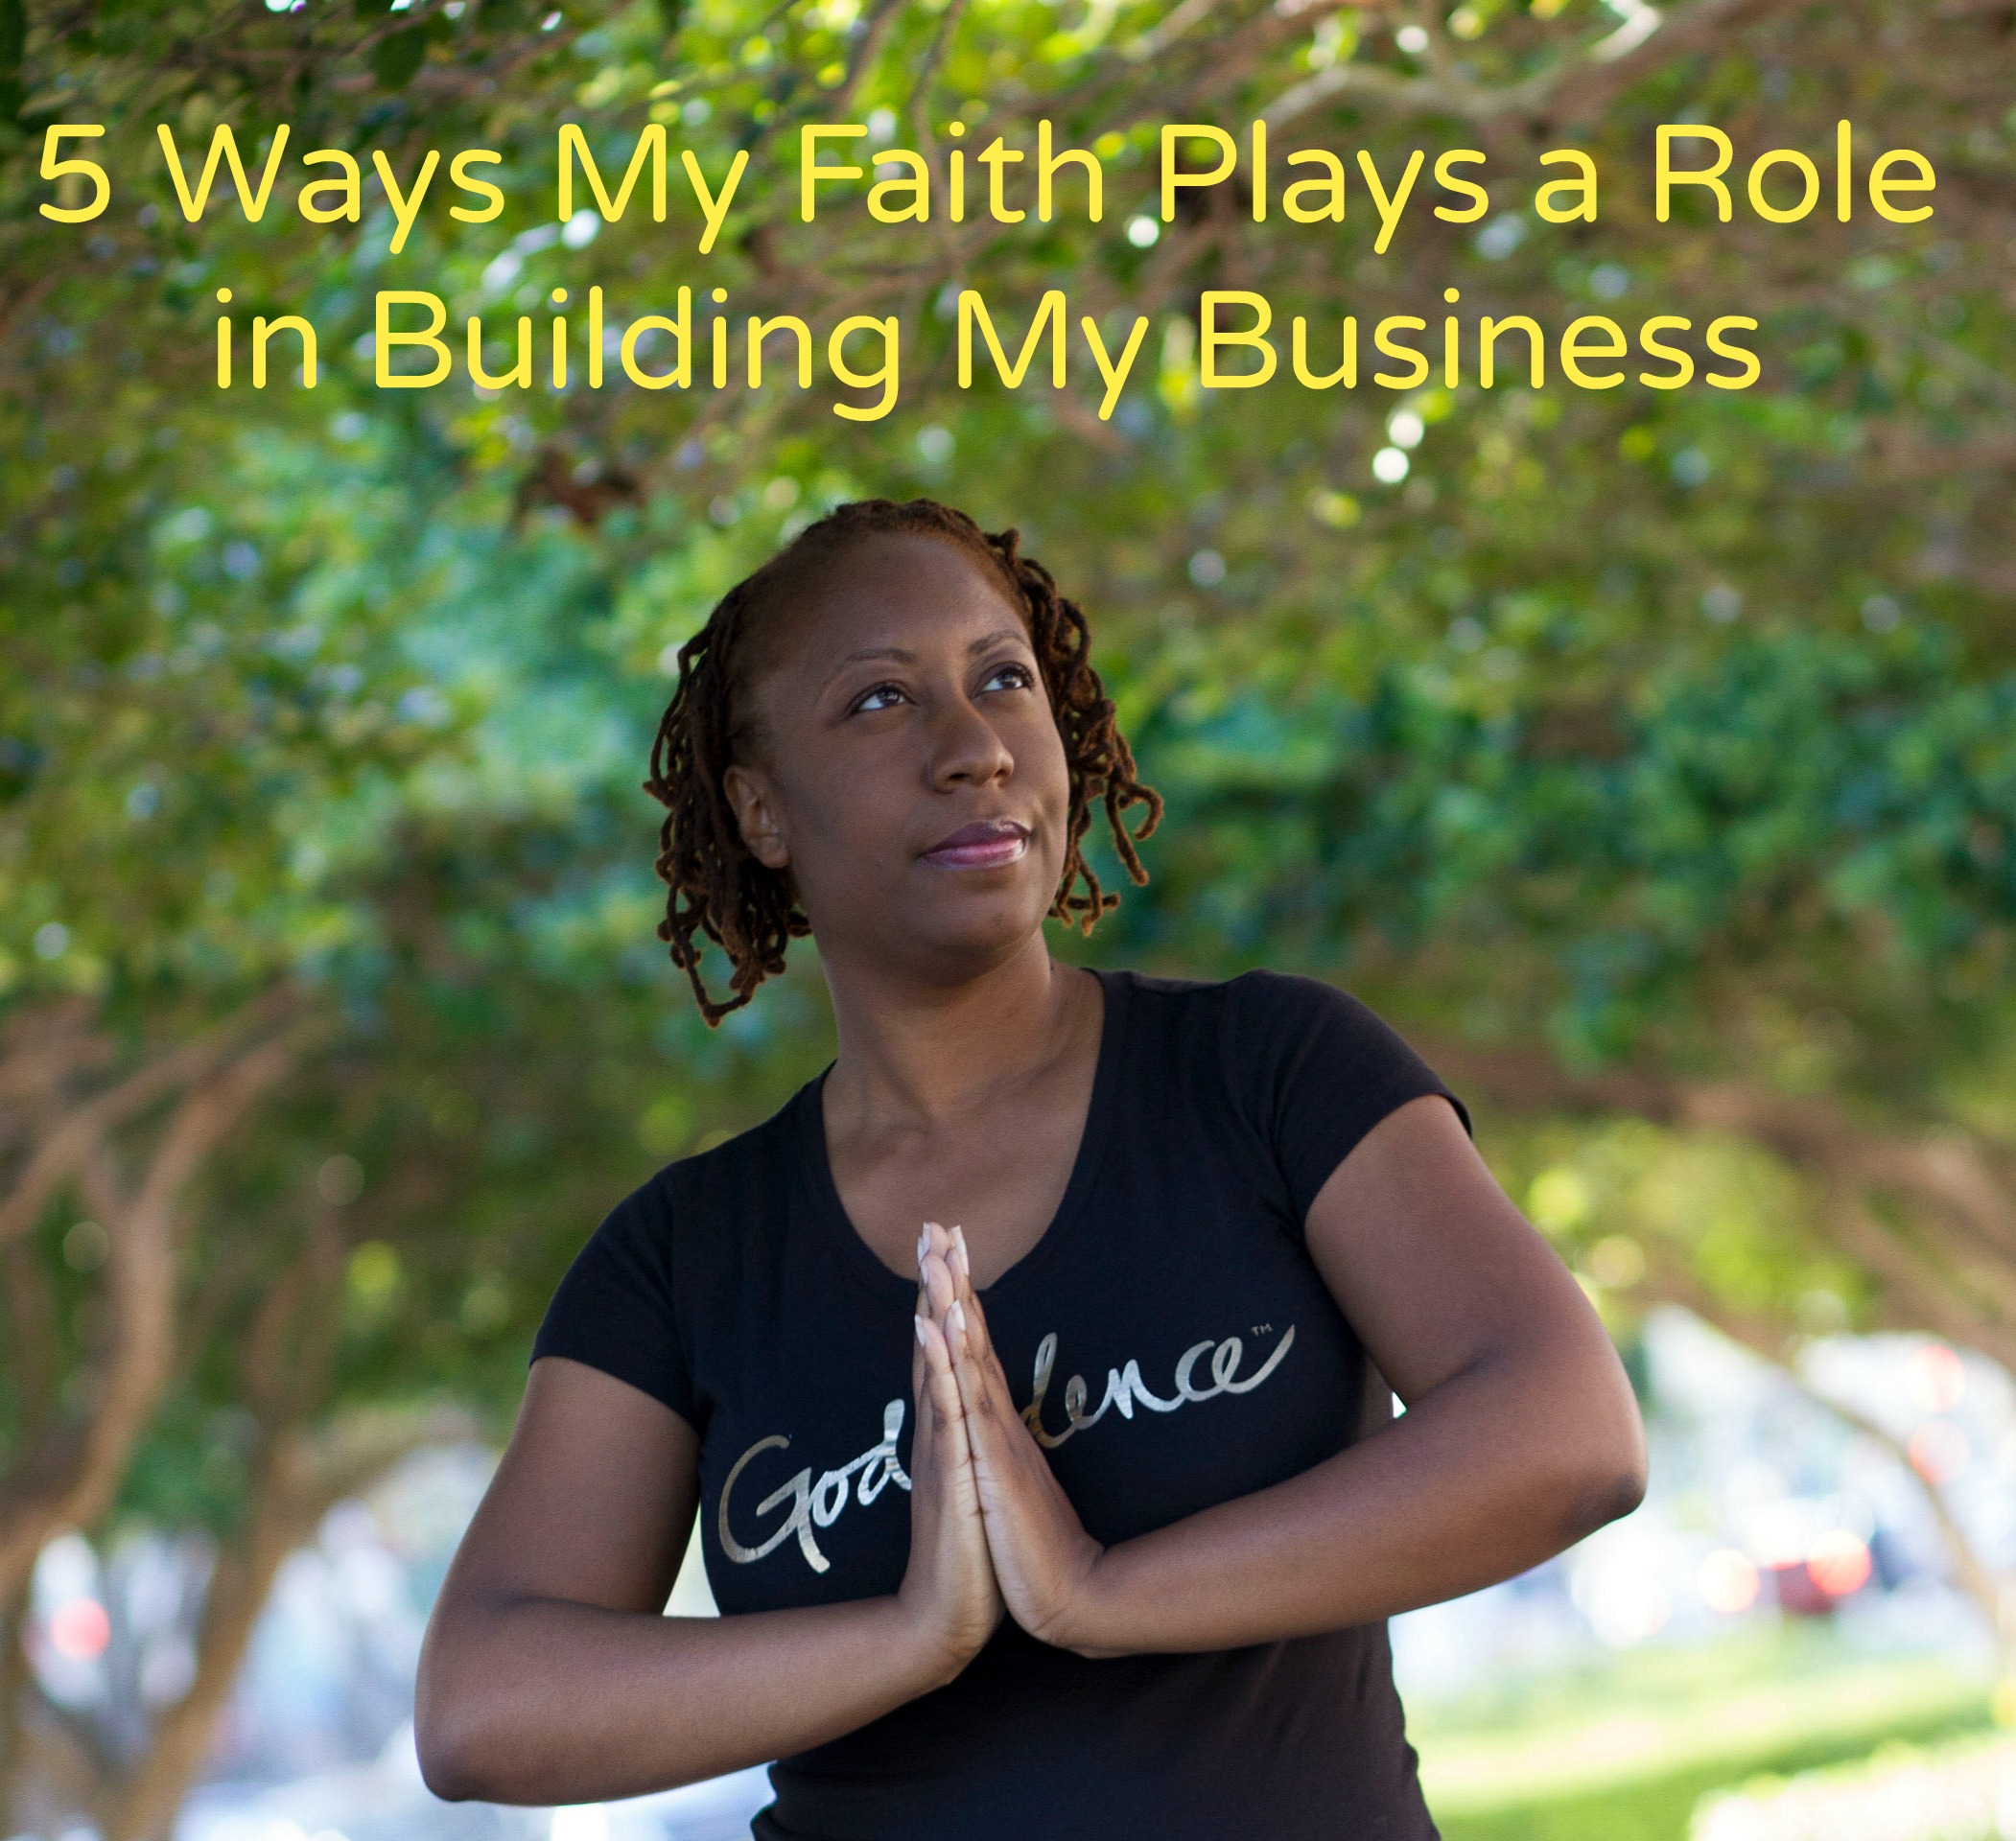 5 Ways My Faith Plays a Role in Building My Business